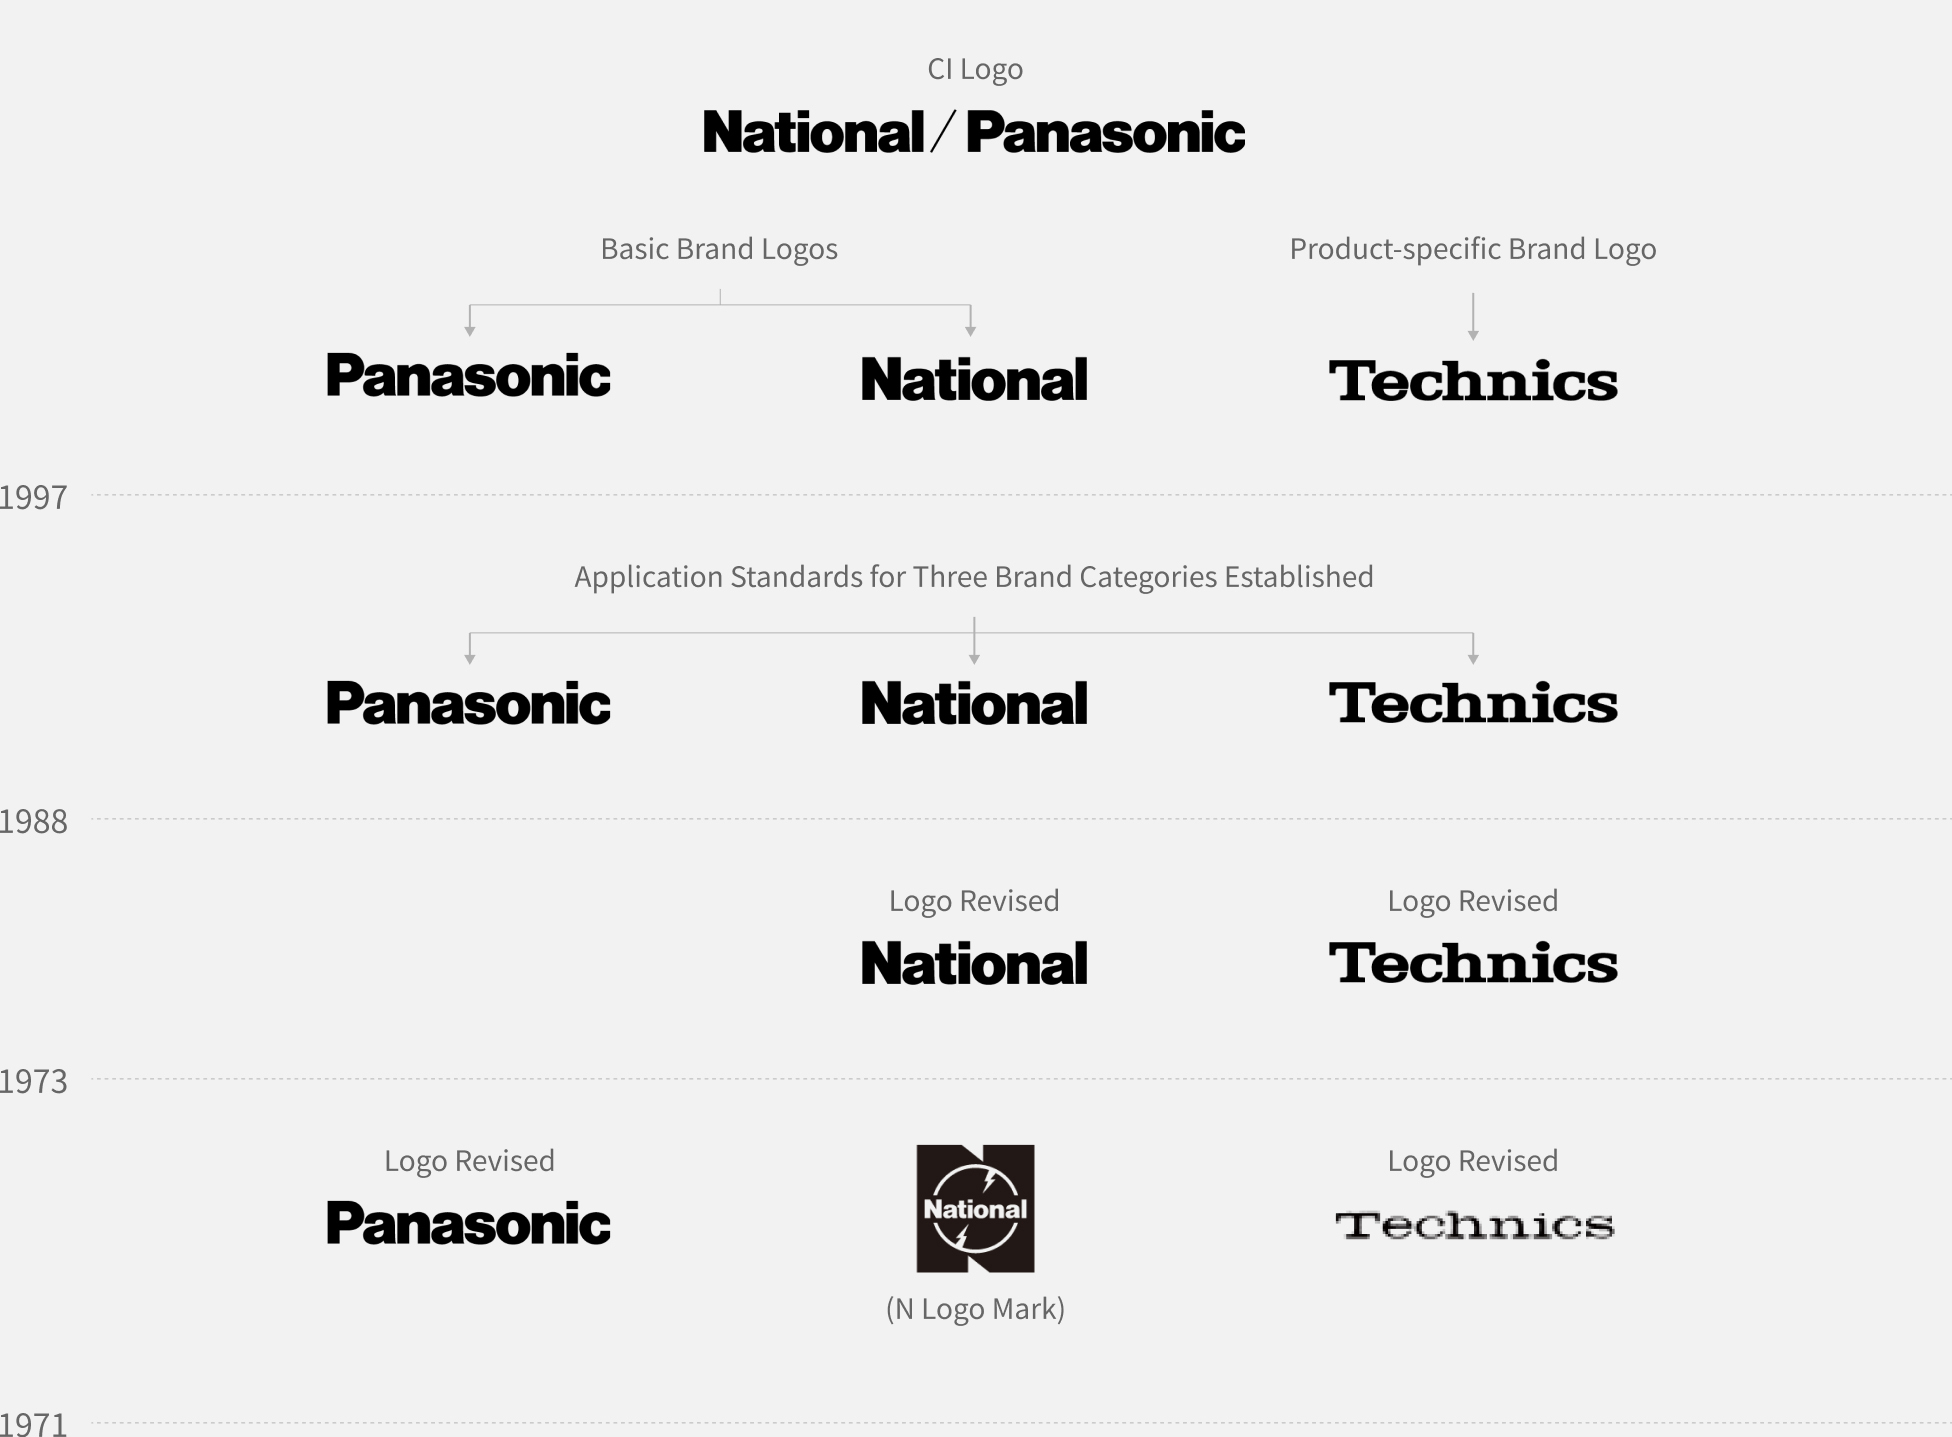 1997: "National/Panasonic" as our CI logo, "Panasonic" and "National" as our basic brand logos, and "Technics" as our product-specific brand logo. 1988: Application standards for three brand categolies estabilished as "Panasonic," "National," and "Technics." 1973: "National" and "Technics" logos revised. 1971: "Panasonic" logo revised, N-logo Mark "National," and "Technics" logo revised.